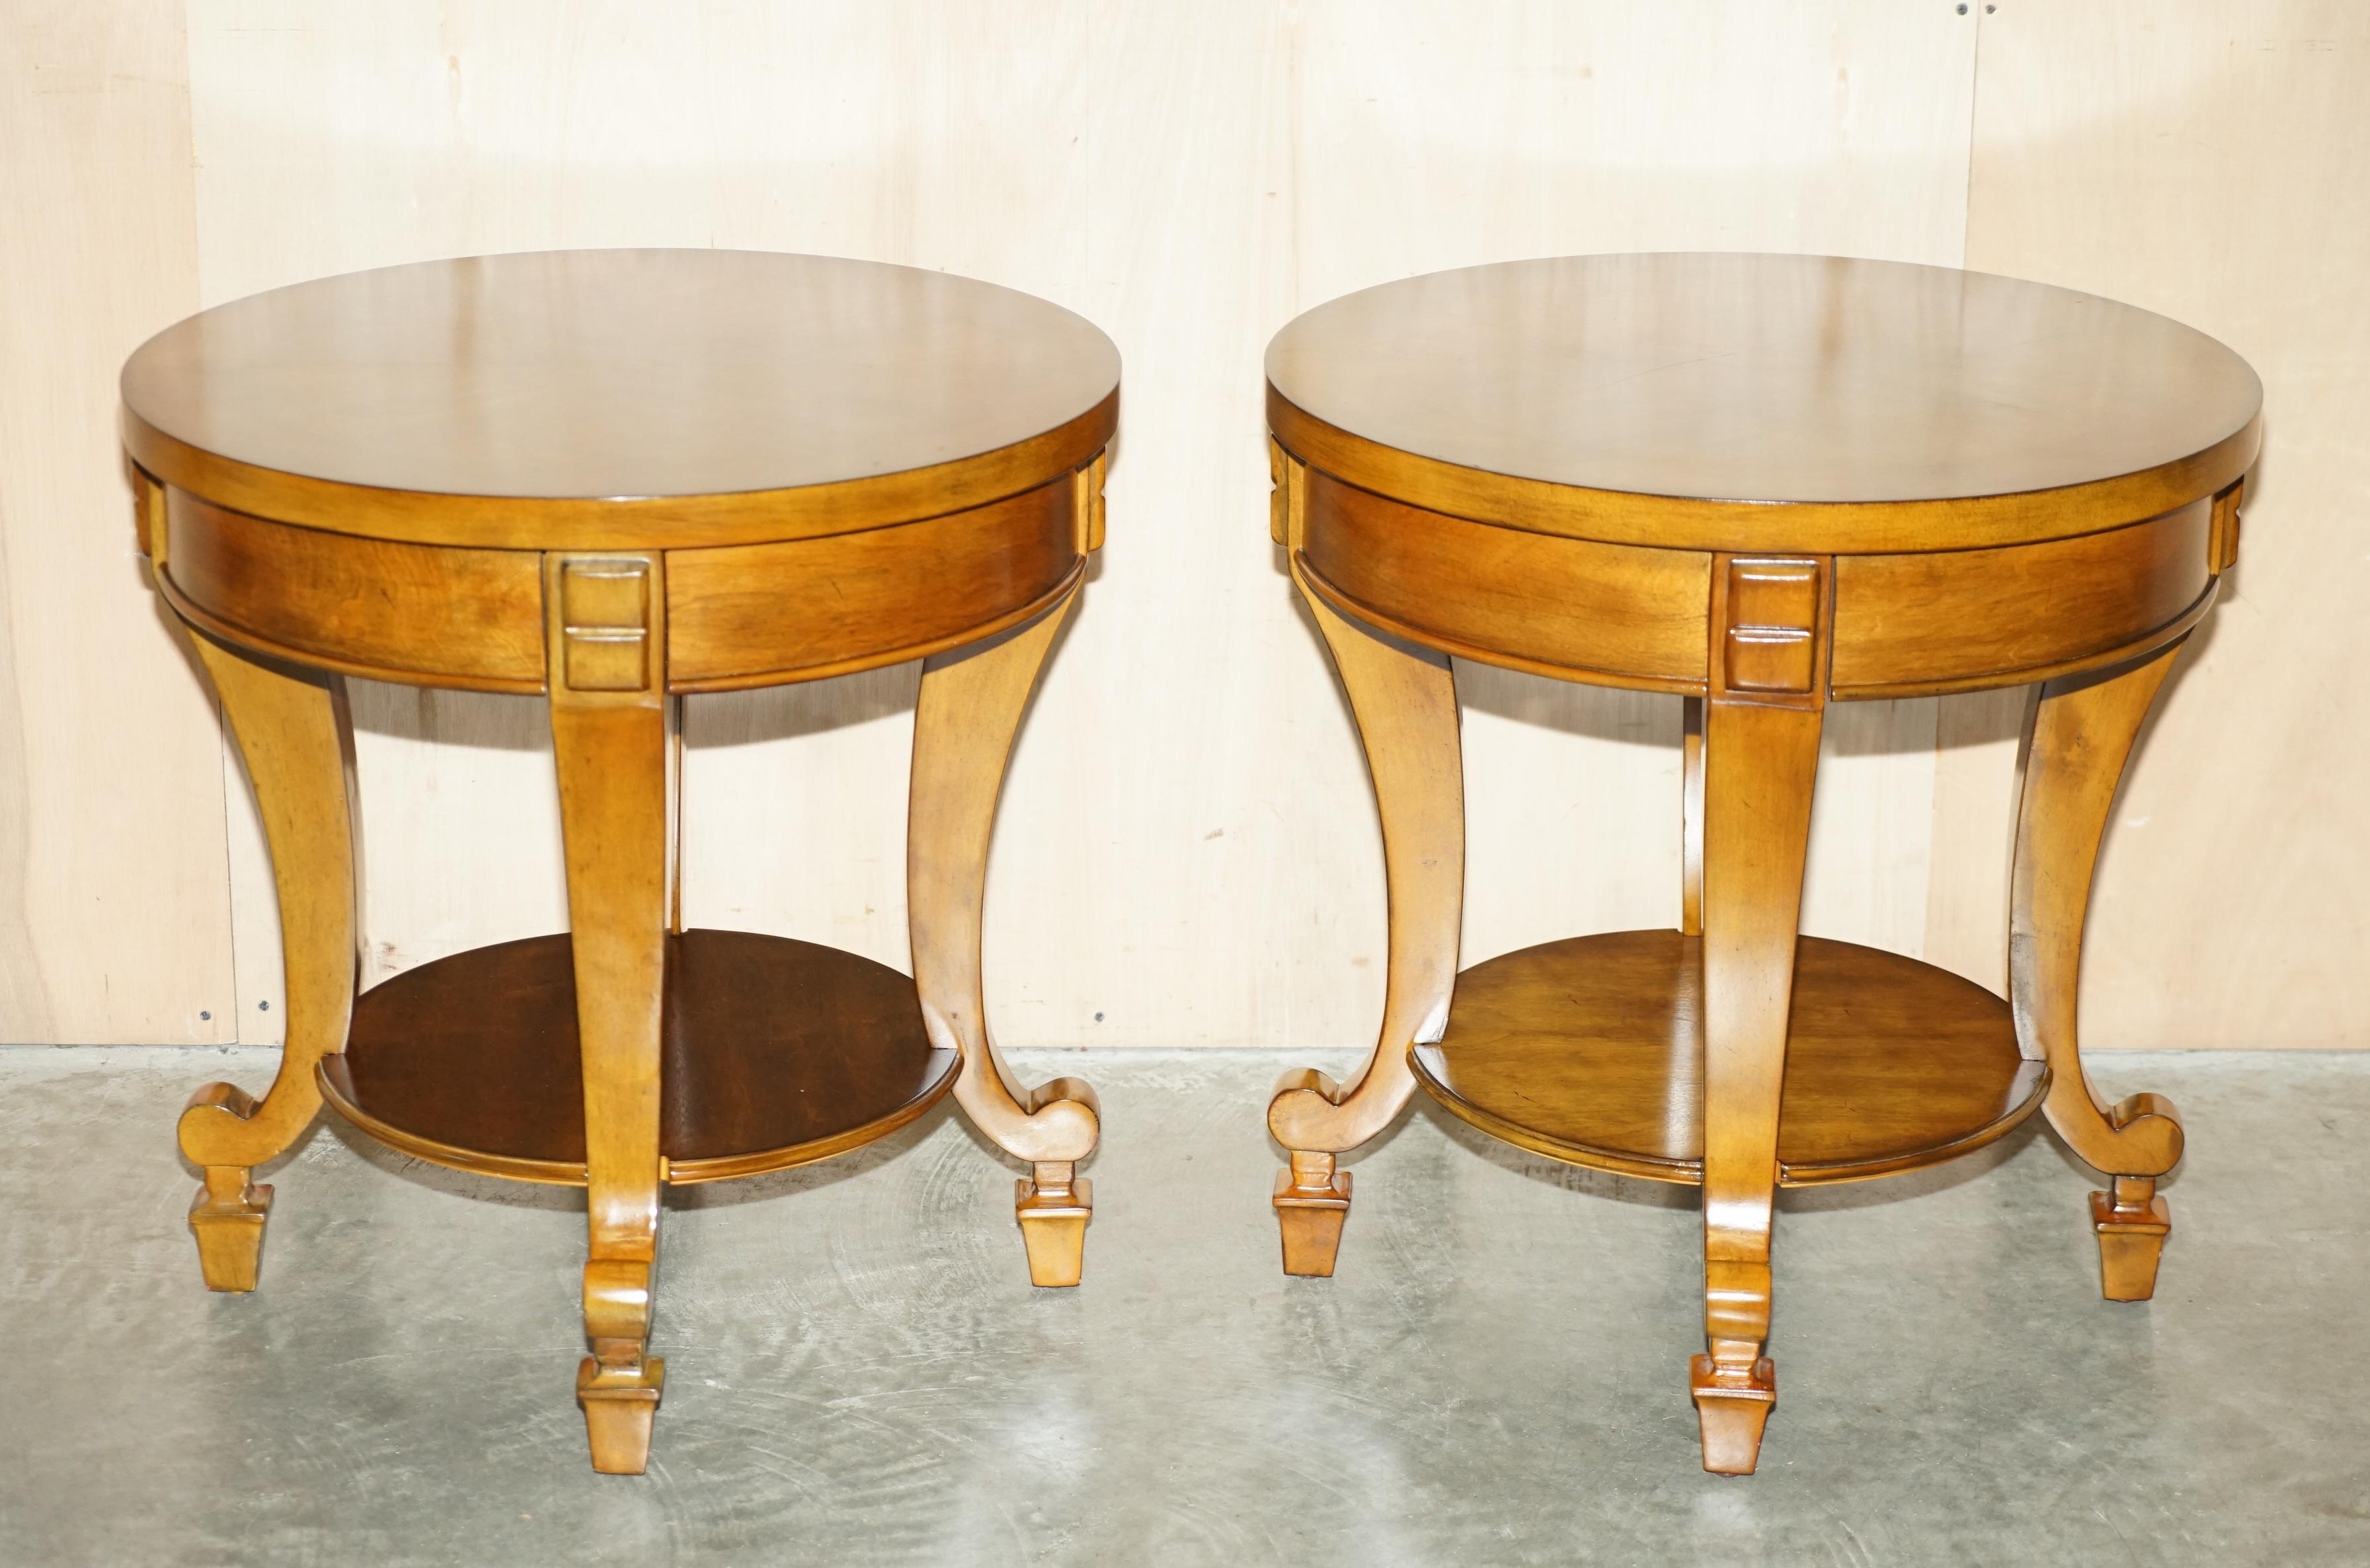 We are delighted to offer for sale this stunning pair of RRP £11,000 large American Walnut Ralph Lauren side or occasional tables

A good looking and decorative pair, the timber patina is to die for, it is simply glorious, they glow in the right